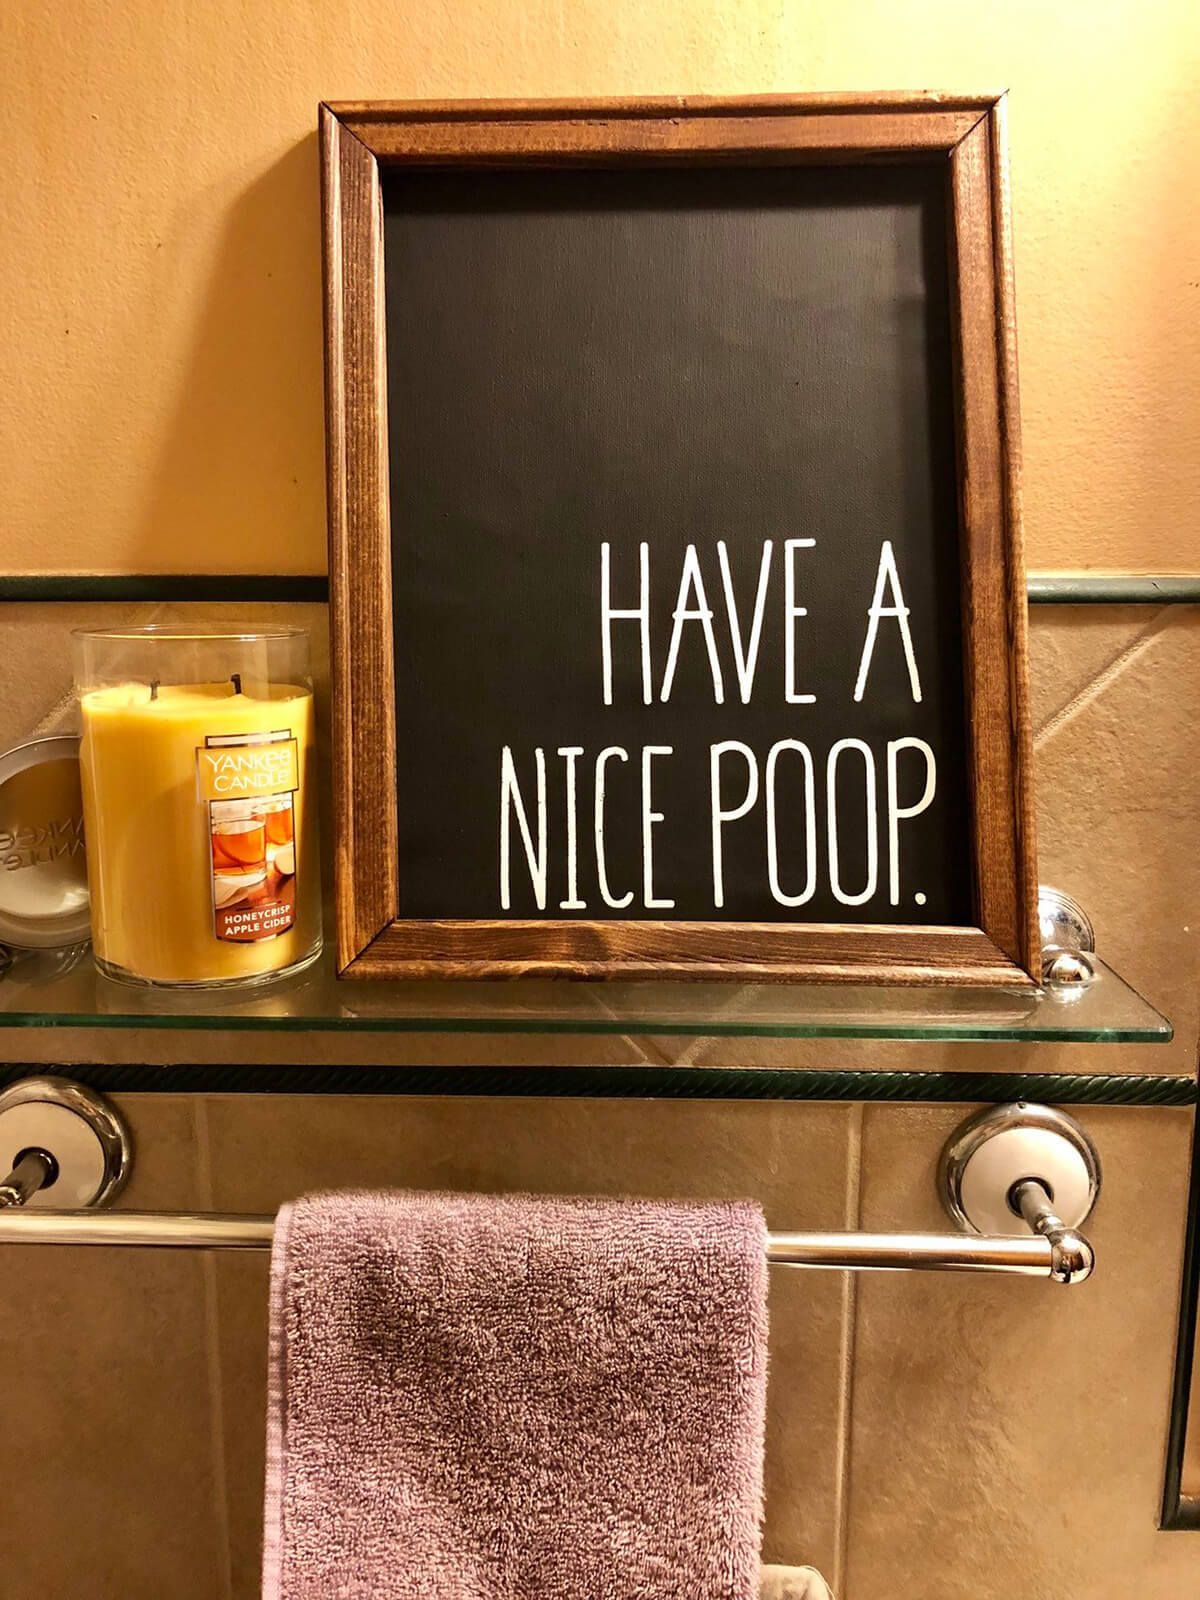 Have-a-Nice-Poop-bathroom-sign-seems-to-offer-a-bit-of-motivation-for-everyone-86186